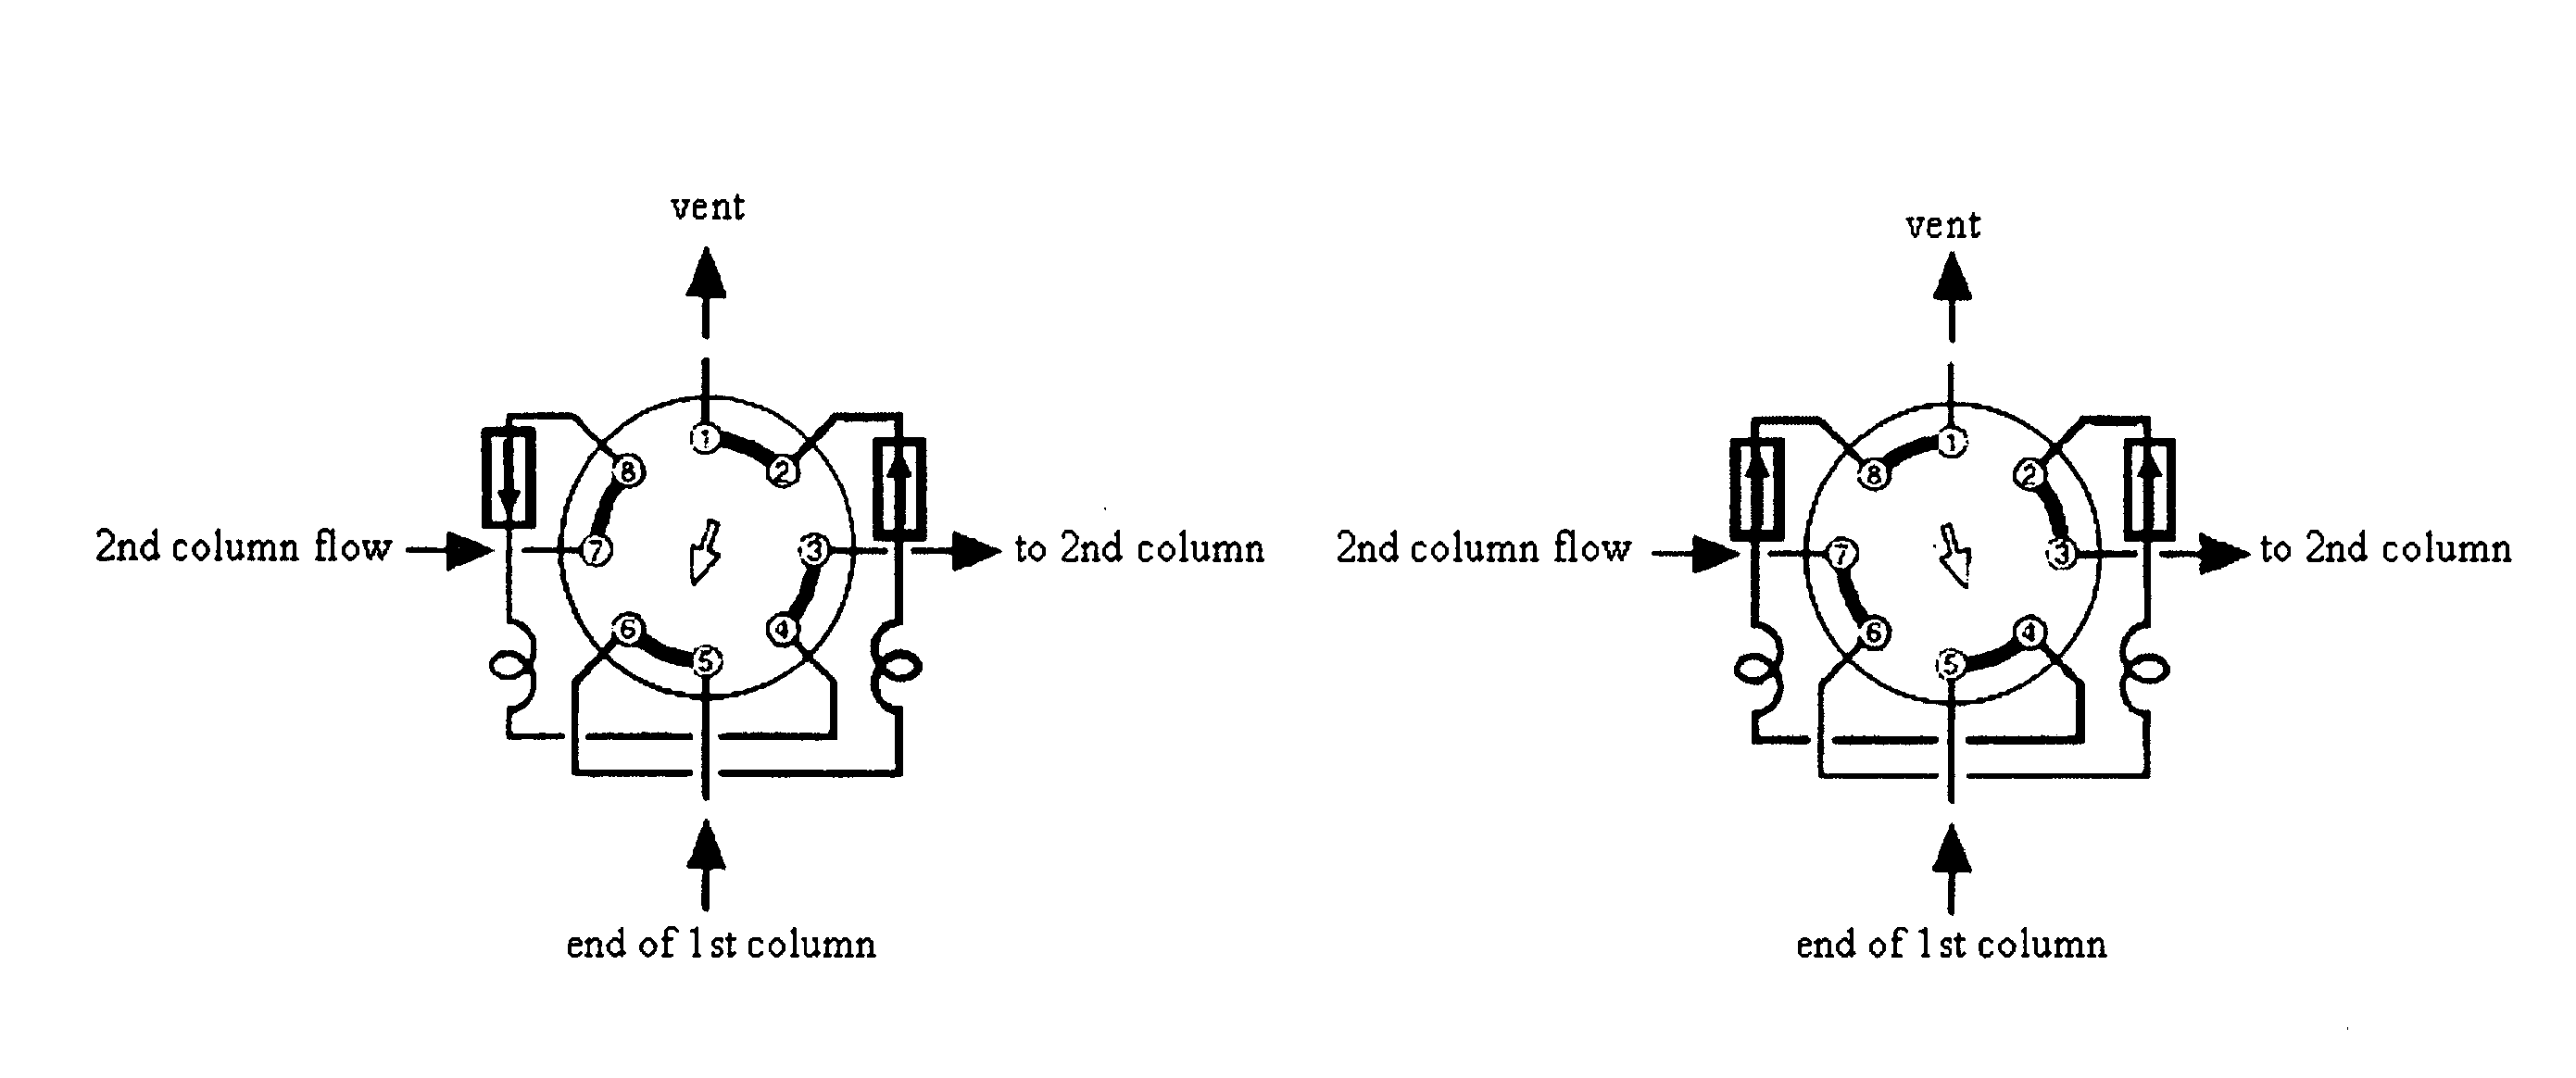 Comprehensive two-dimensional gas chromatography method with one switching valve as the modulator